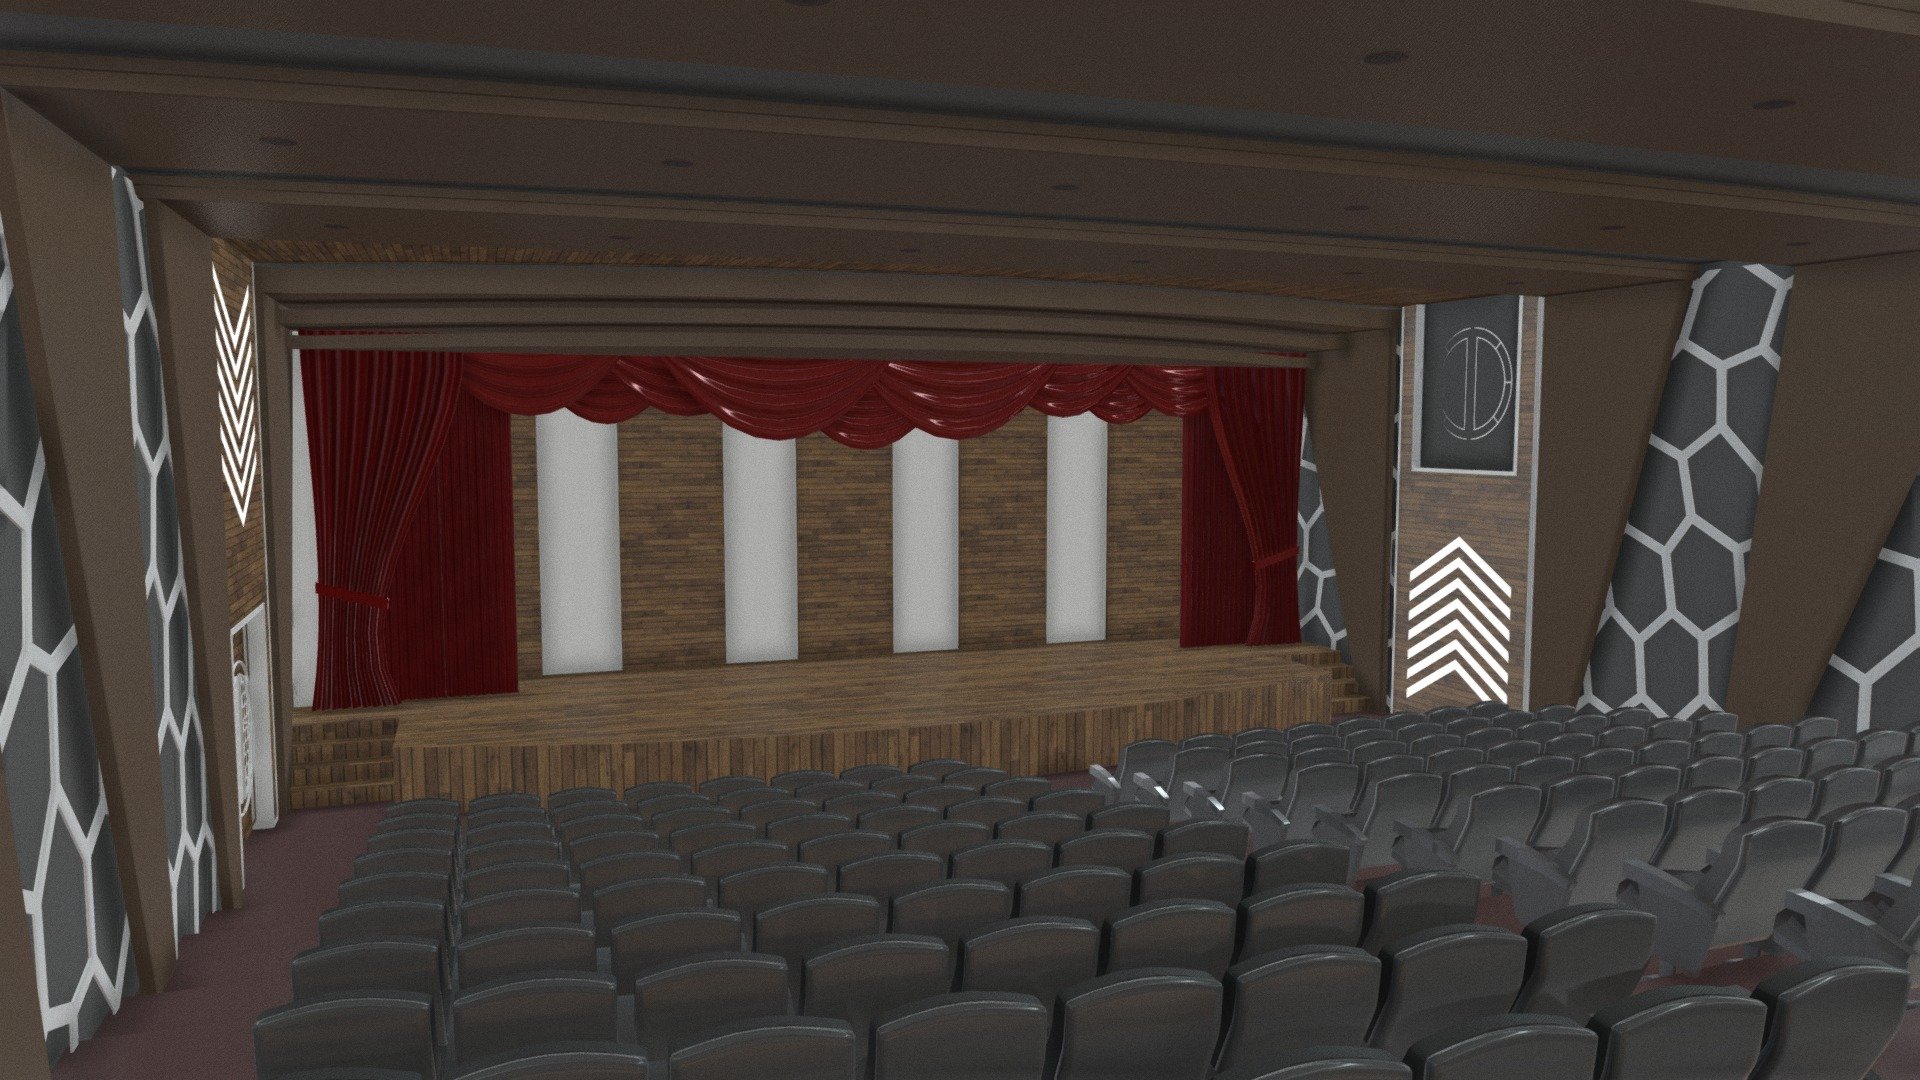 The Theater Hall Concept is fully ready, with a vray rendering engine, impressive looks and a low polygon 3d model